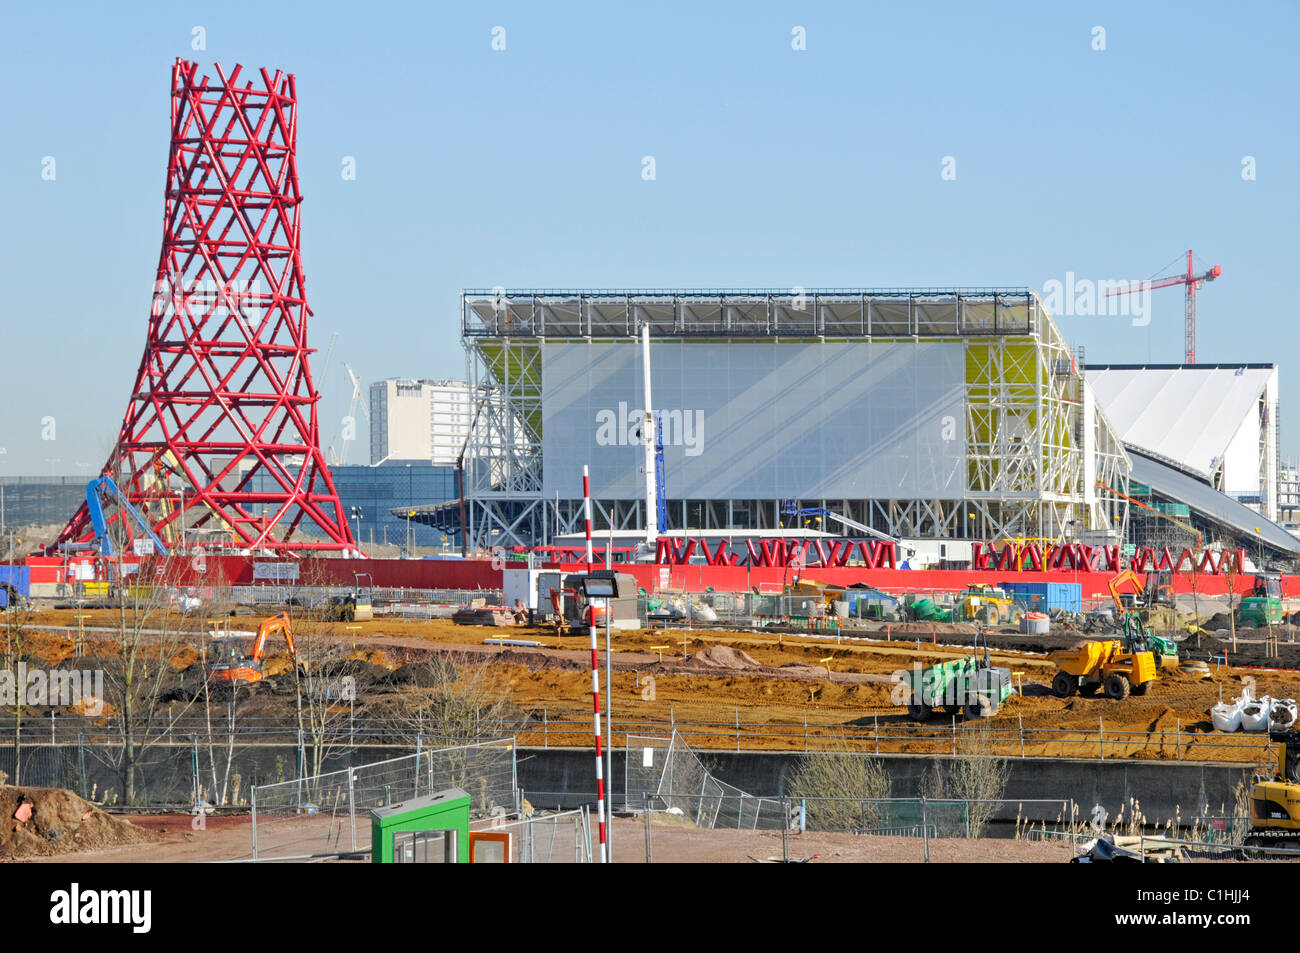 Anish Kapoor 2012 London Olympic Orbit sculpture tower under construction with temporary stands of the Aquatics centre beyond Stock Photo